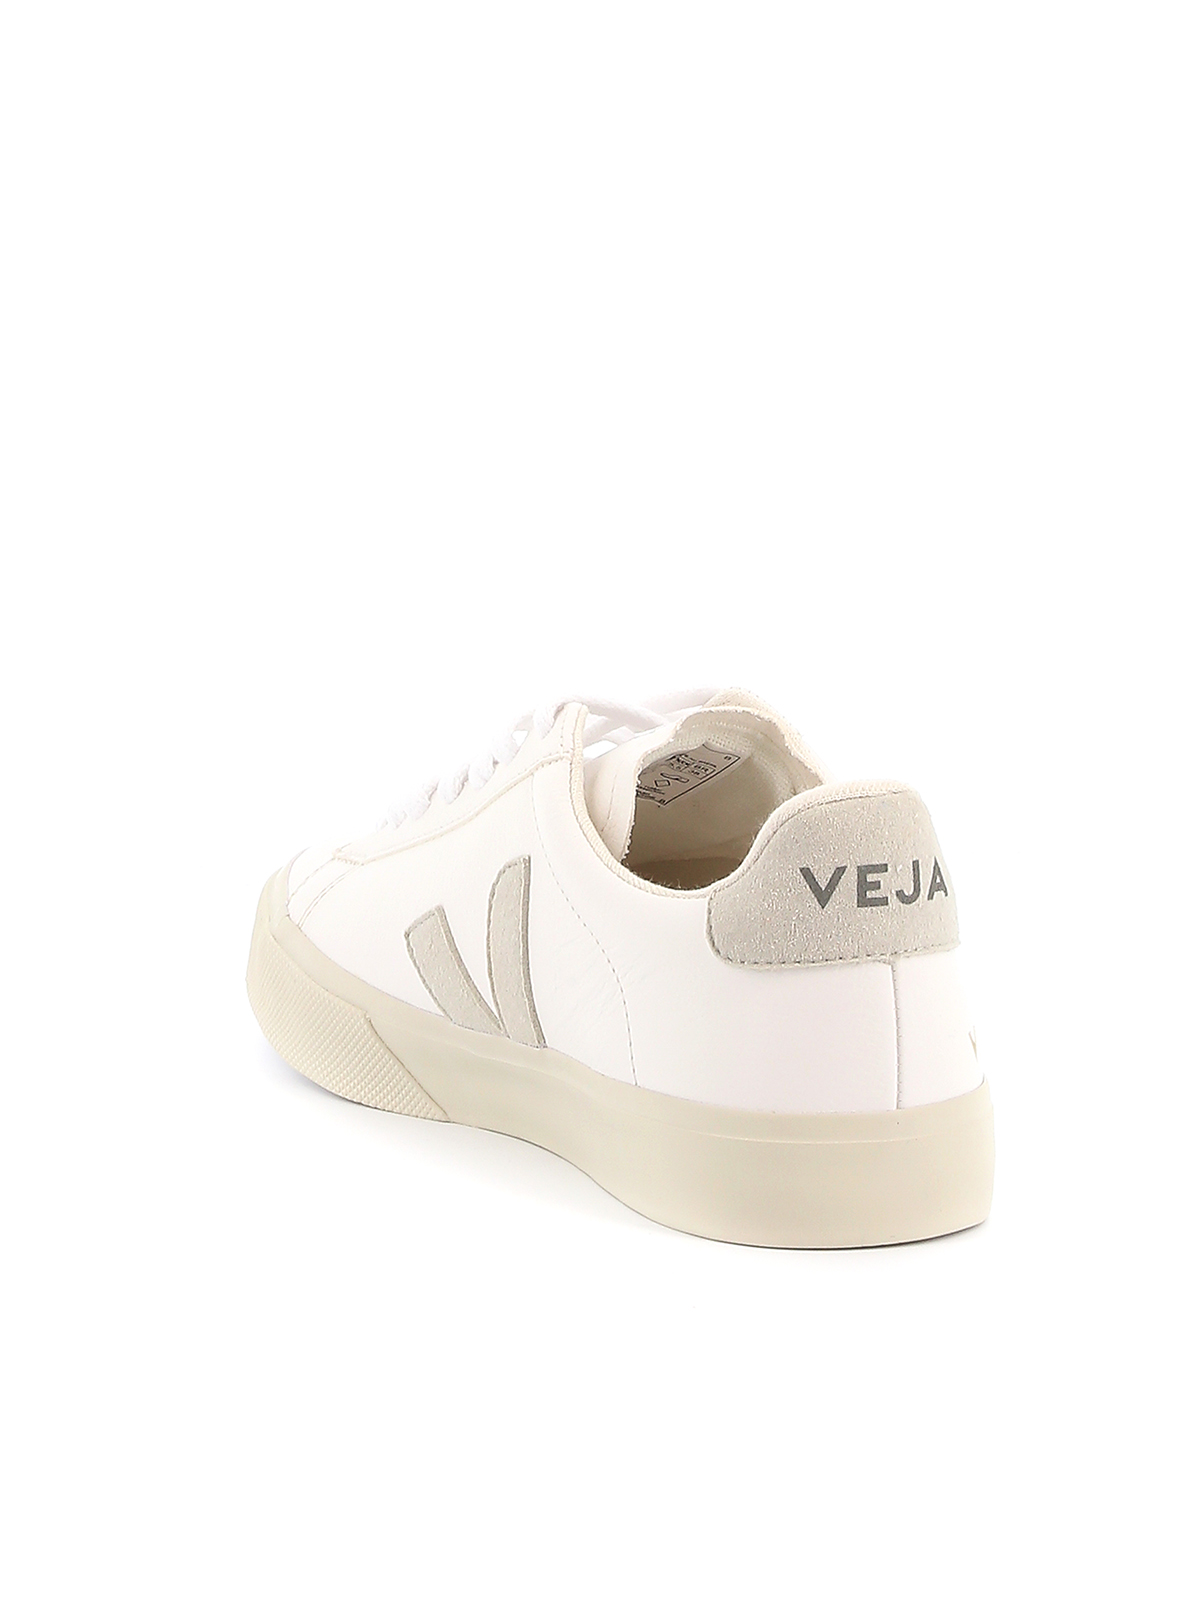 Trainers Veja - Campo leather sneakers - CP051945 | Shop online at iKRIX